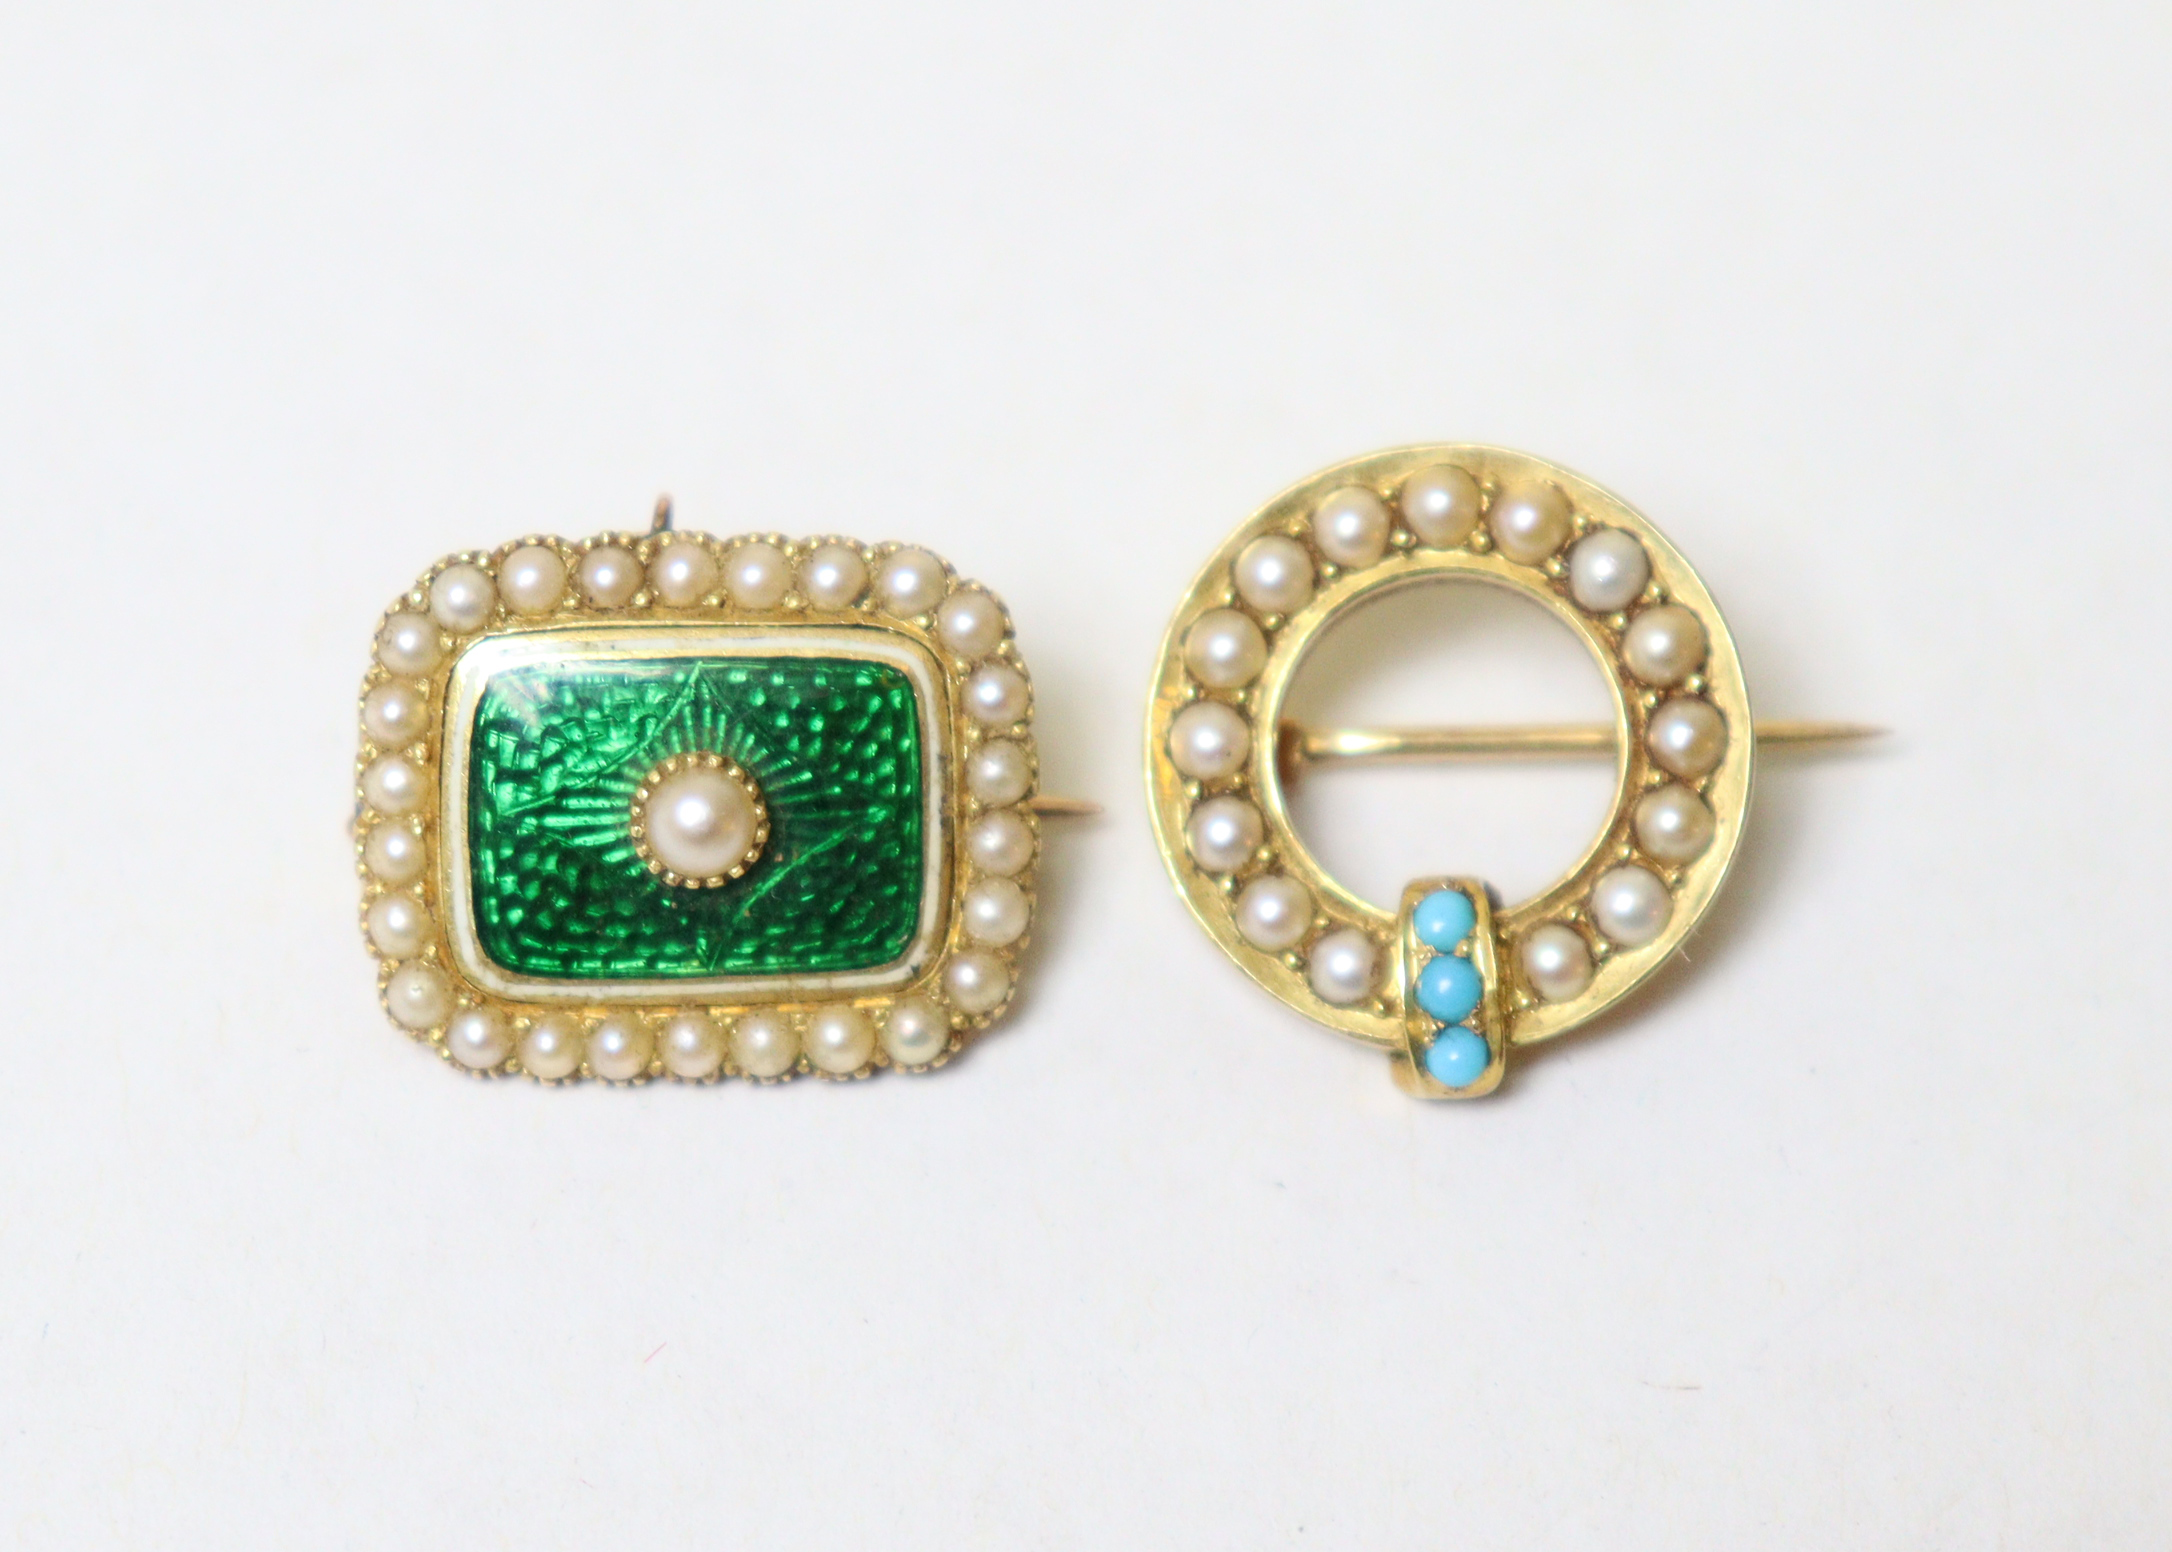 A 19th century small gold, green enamel, & seed pearl rectangular brooch with hair locket to